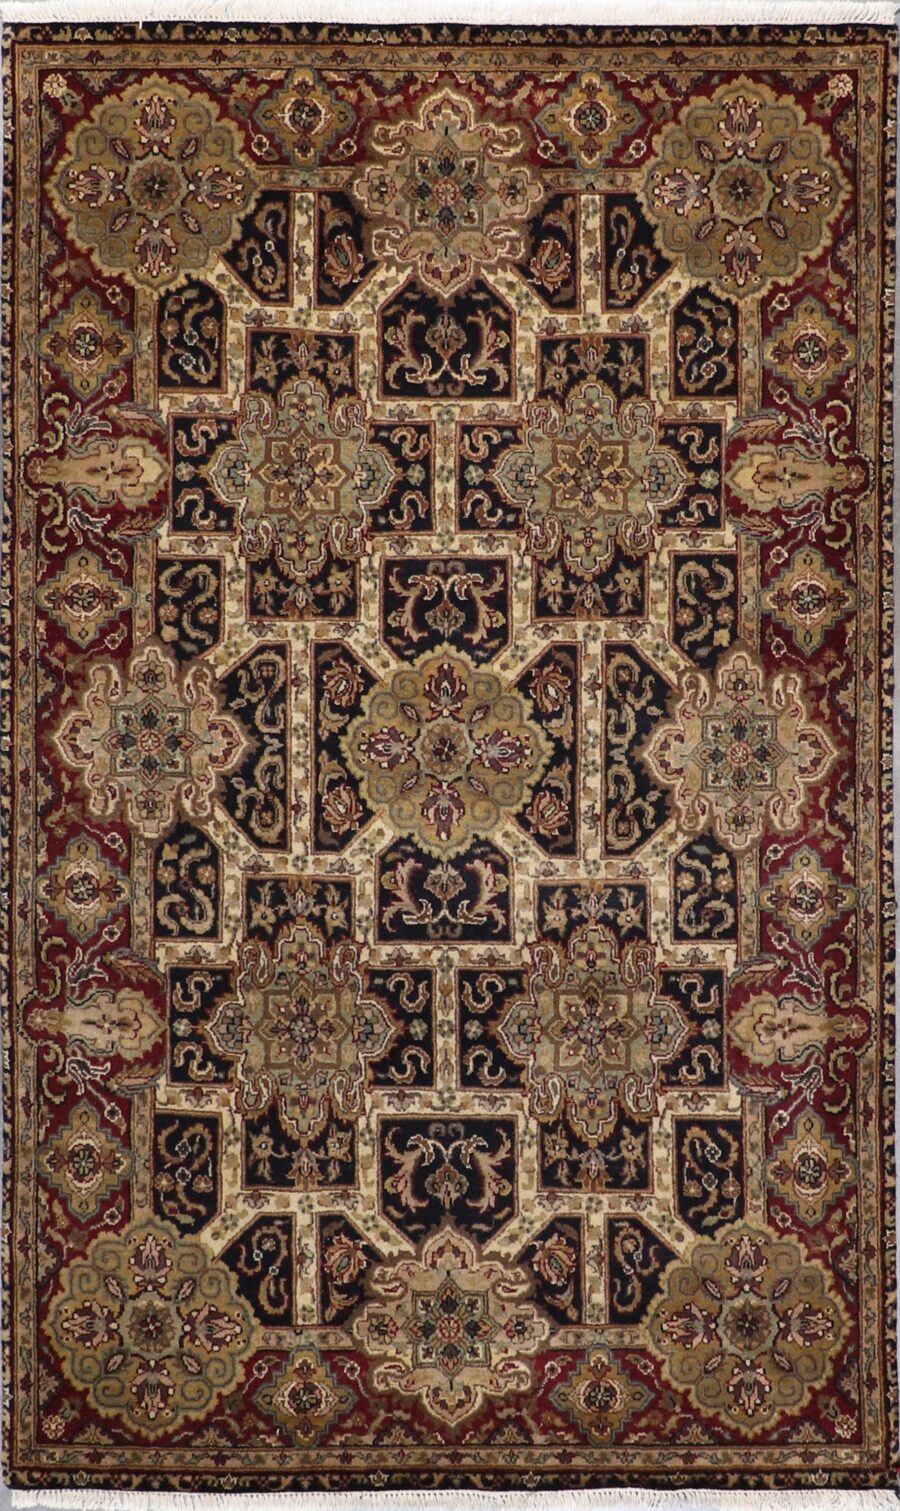 5'x8'3" Traditional Yazed Wool Hand-Knotted Rug - Direct Rug Import | Rugs in Chicago, Indiana,South Bend,Granger